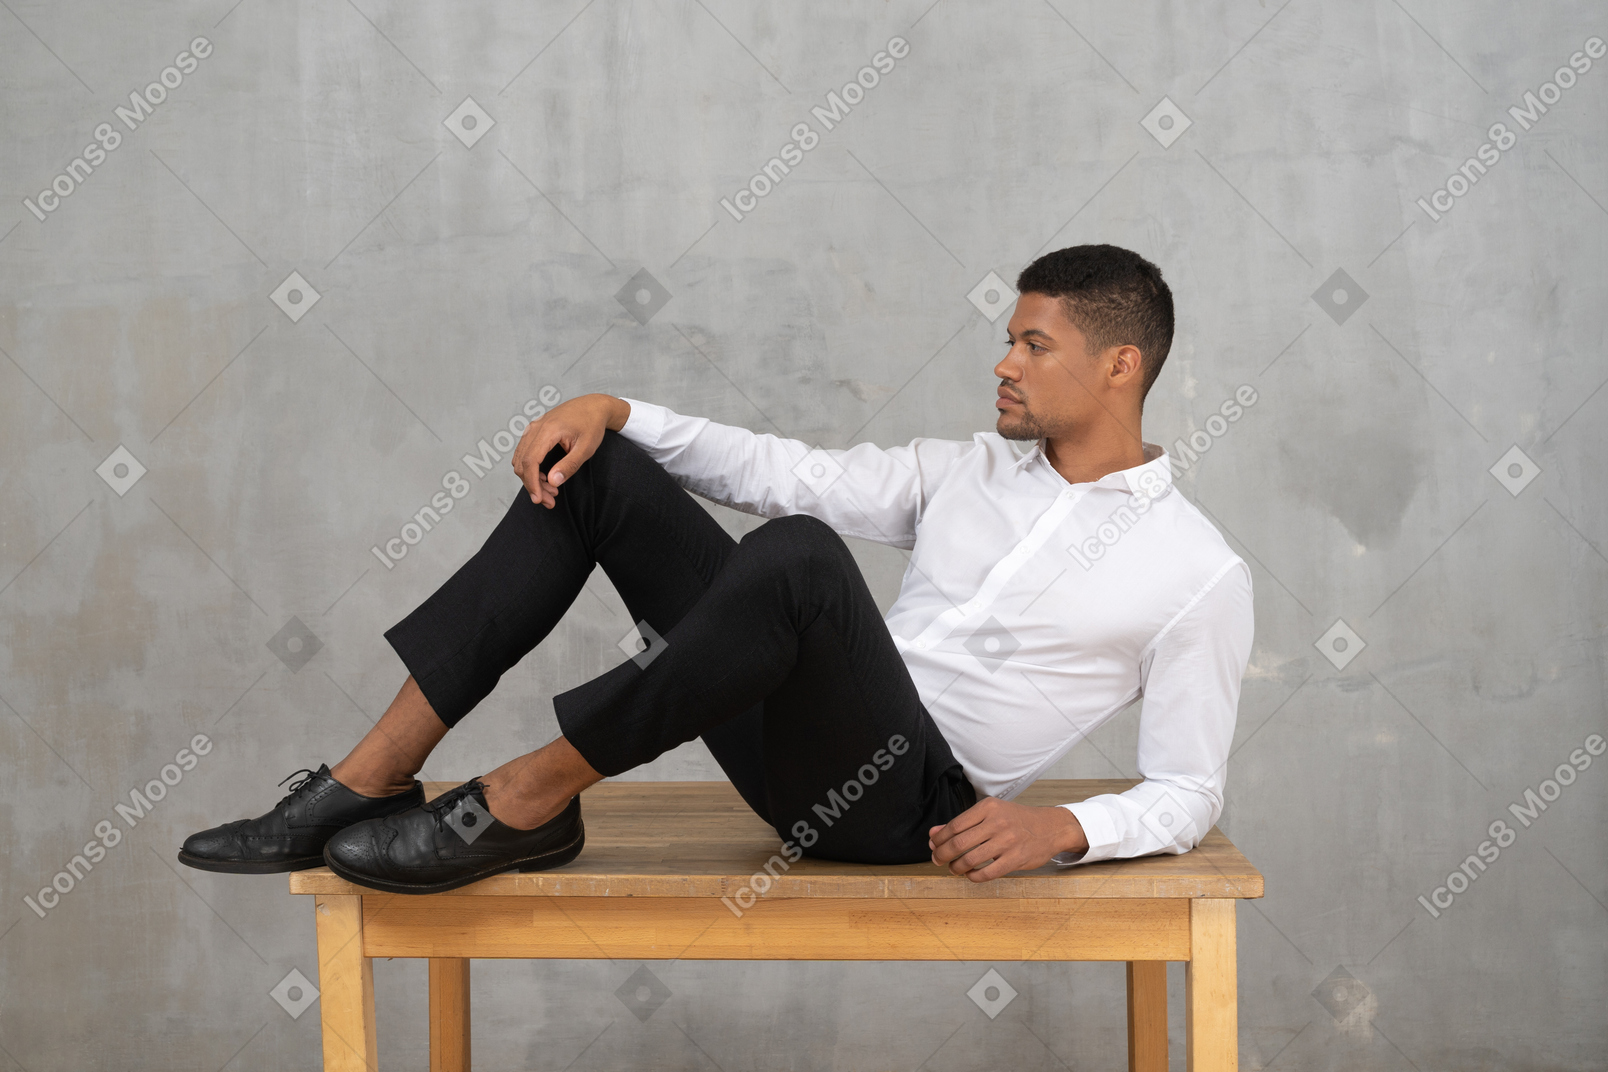 Man in formal clothes lying on a table